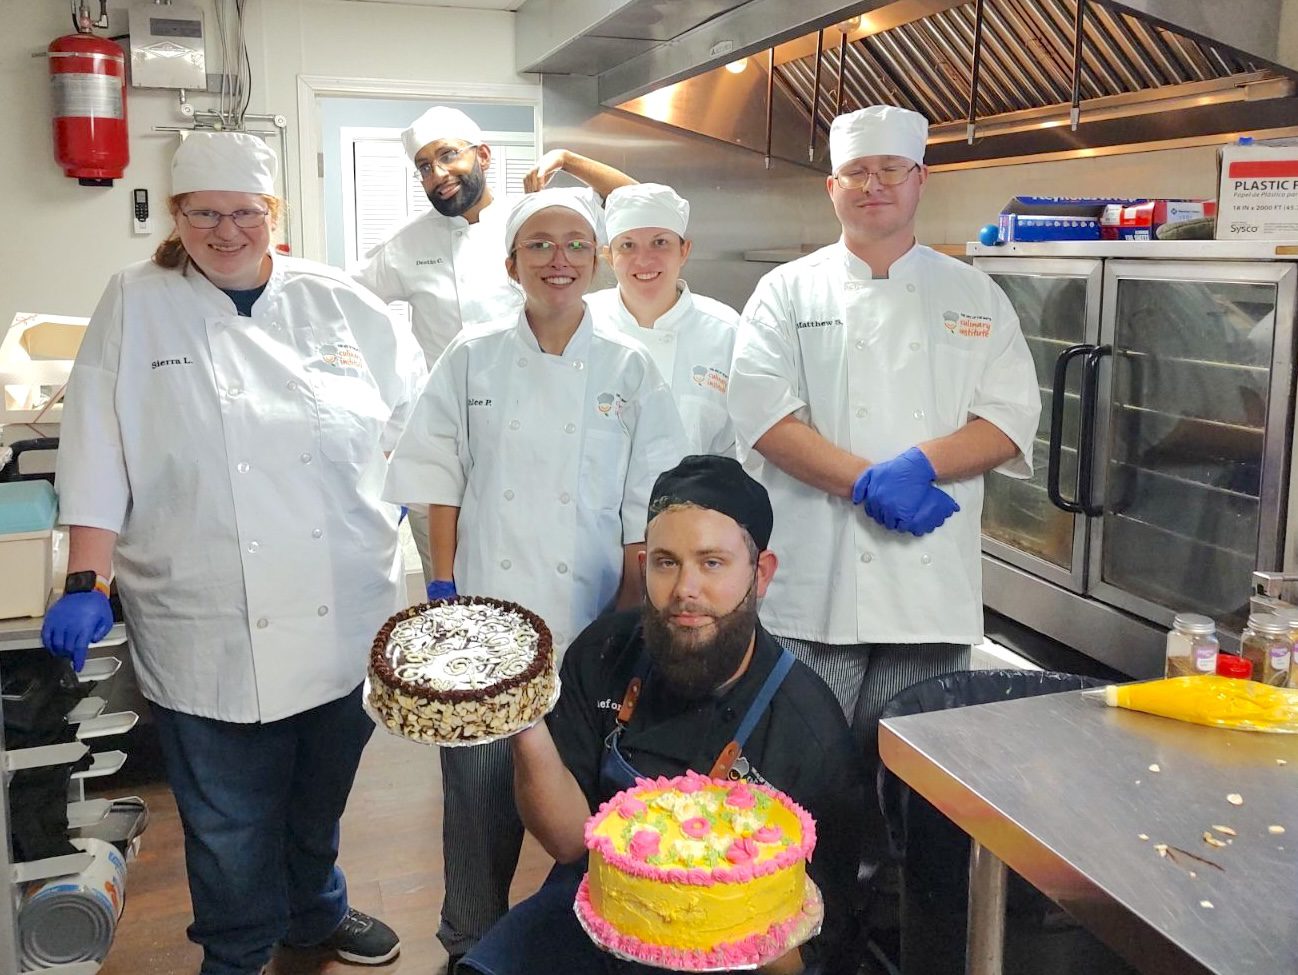 A group of people in a kitchen holding cakes to benefit local nonprofits